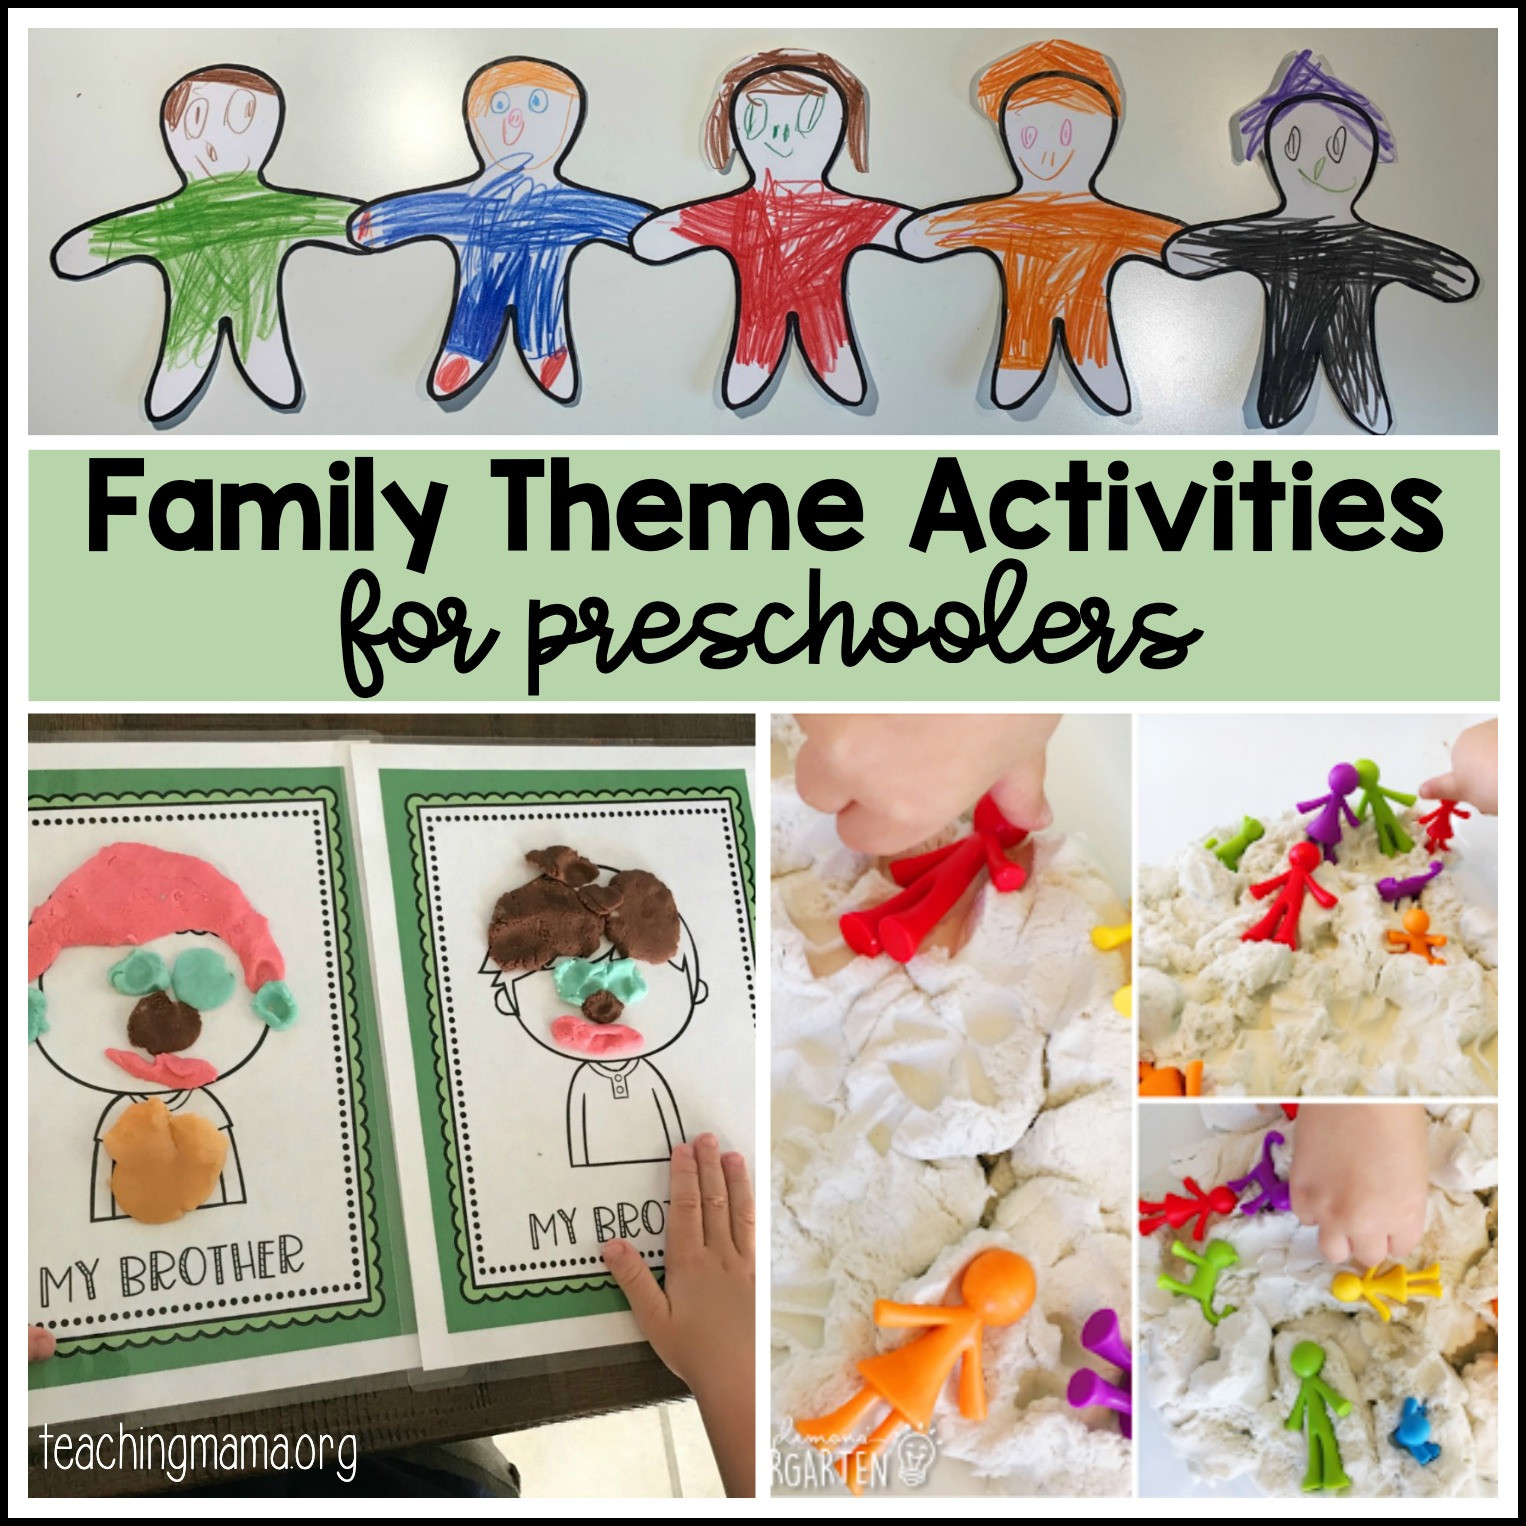 Family Themed Crafts For Toddlers
 Preschool Family Theme Activities